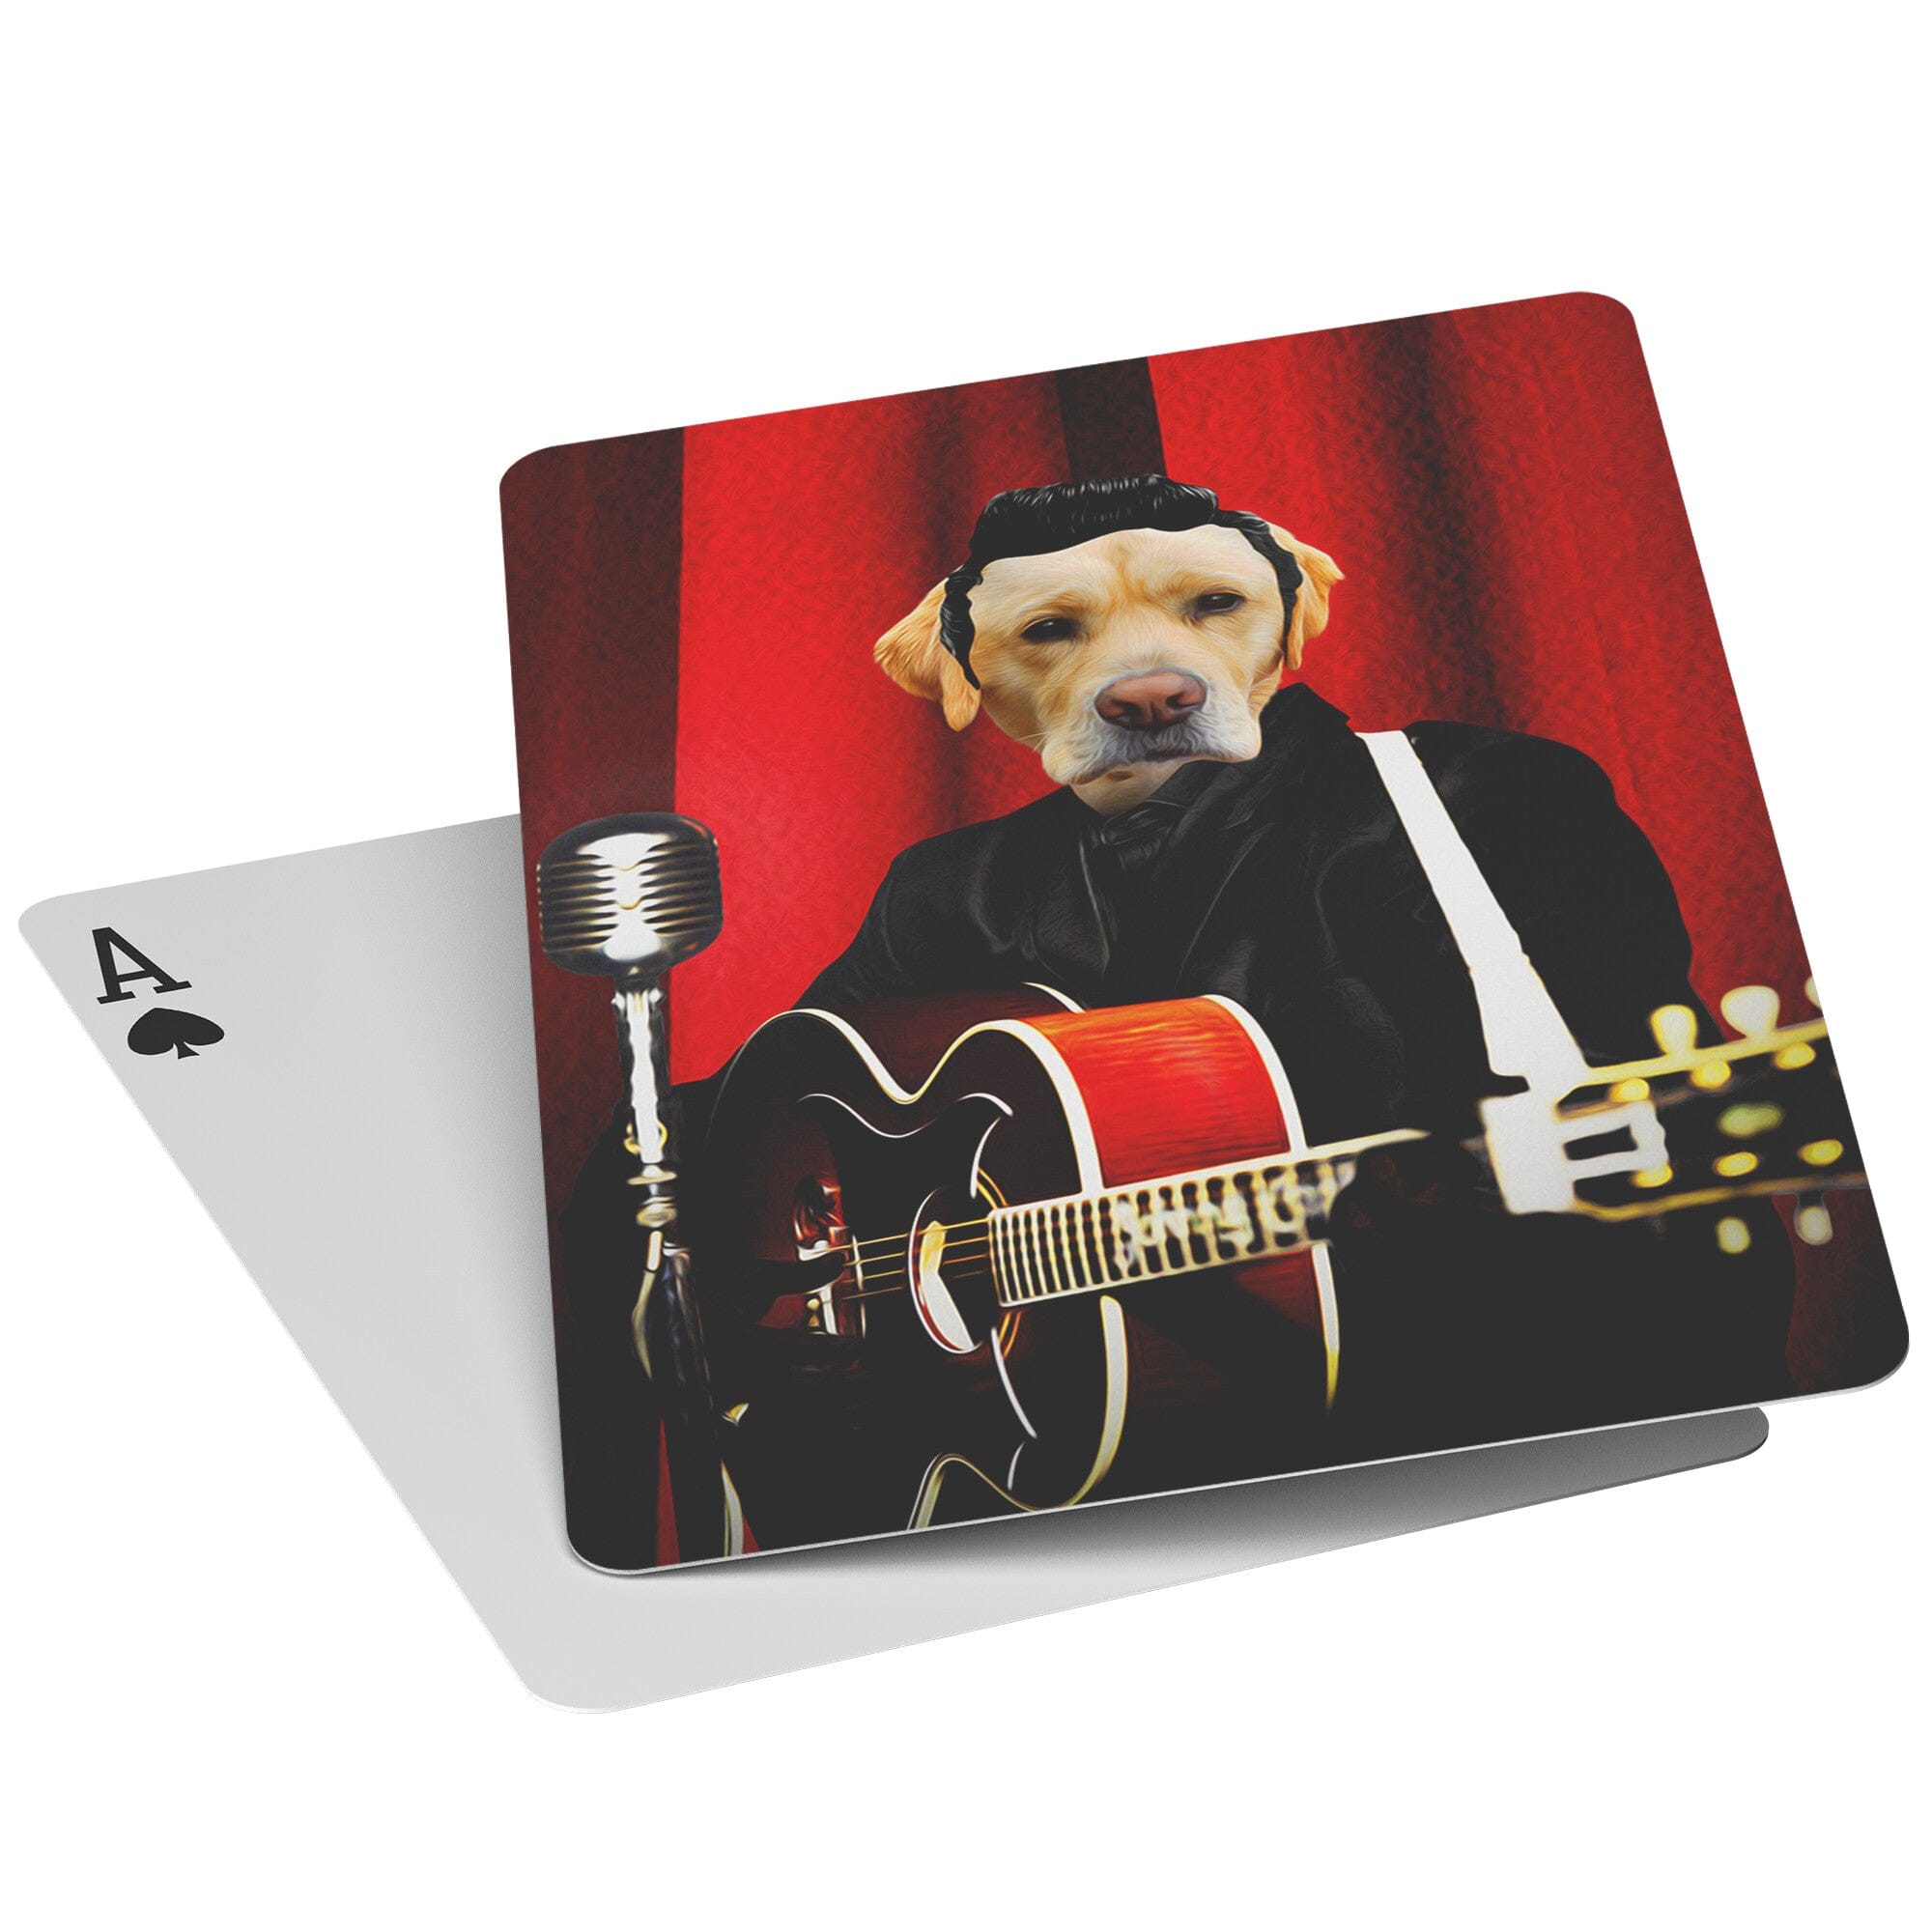 &#39;Doggy Cash&#39; Personalized Pet Playing Cards